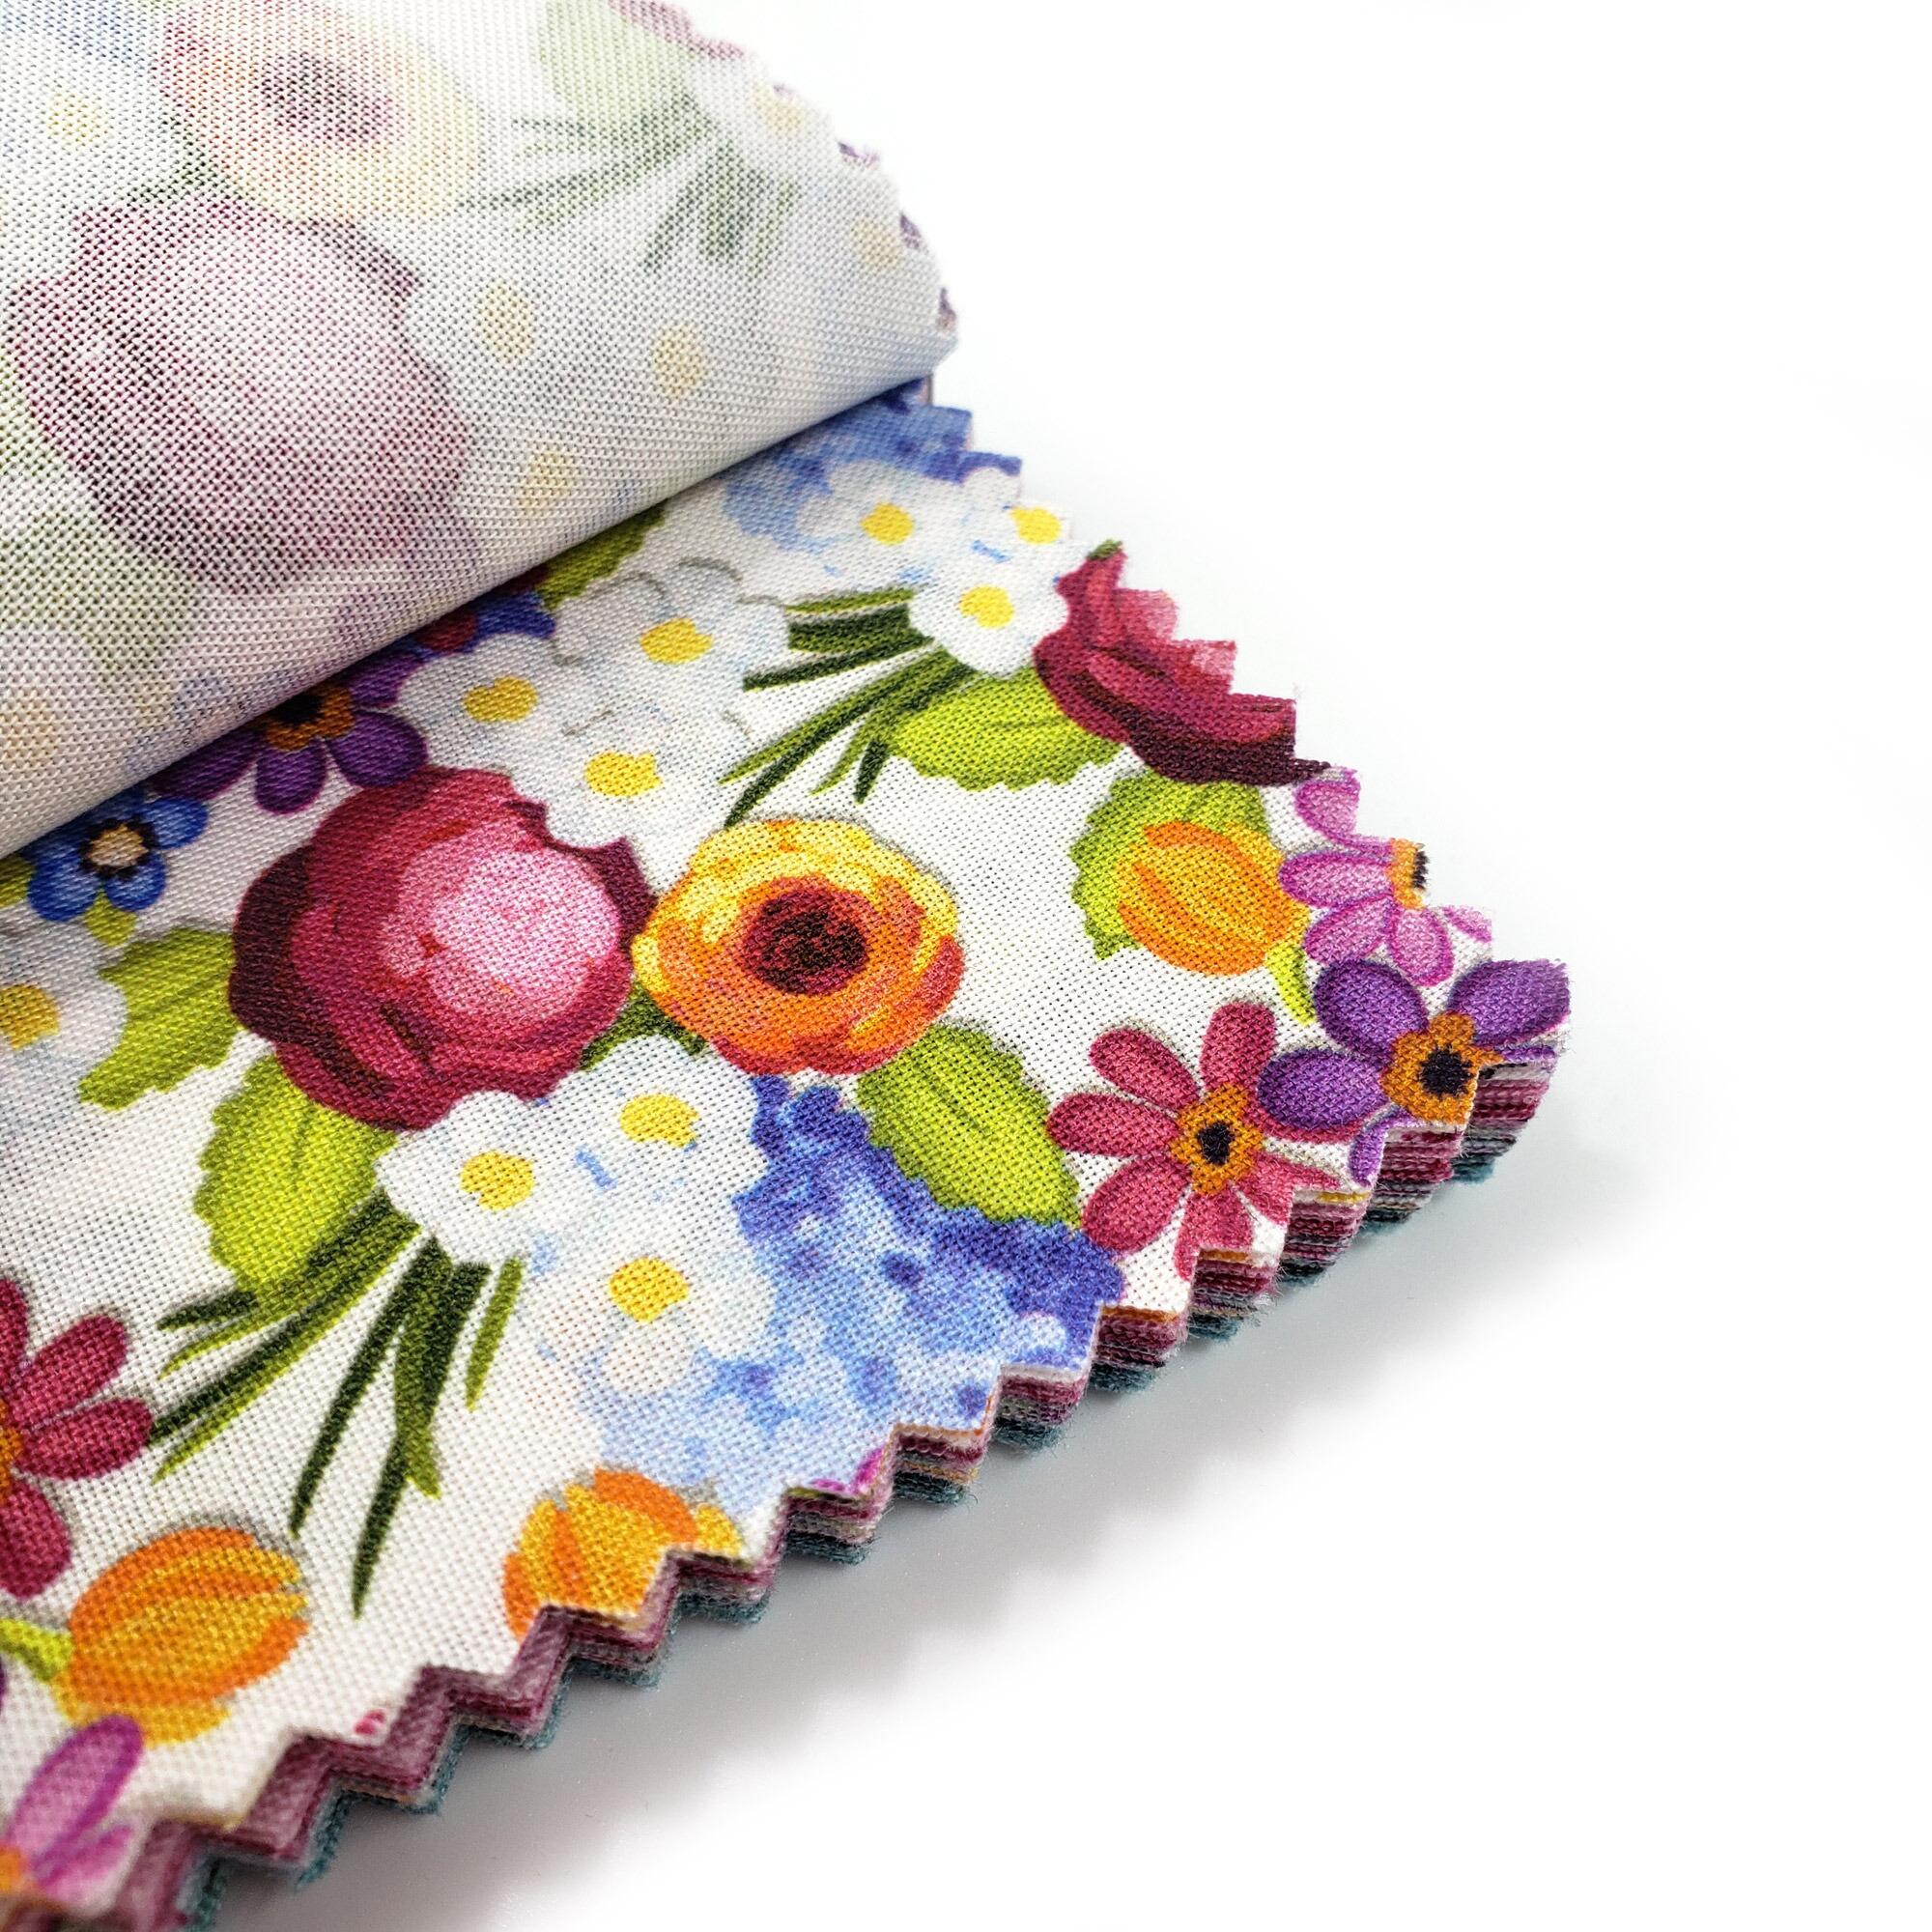 riley blake stacker, floralicious,floral,flowers,garden,baby quilt, patchwork, cotton squares